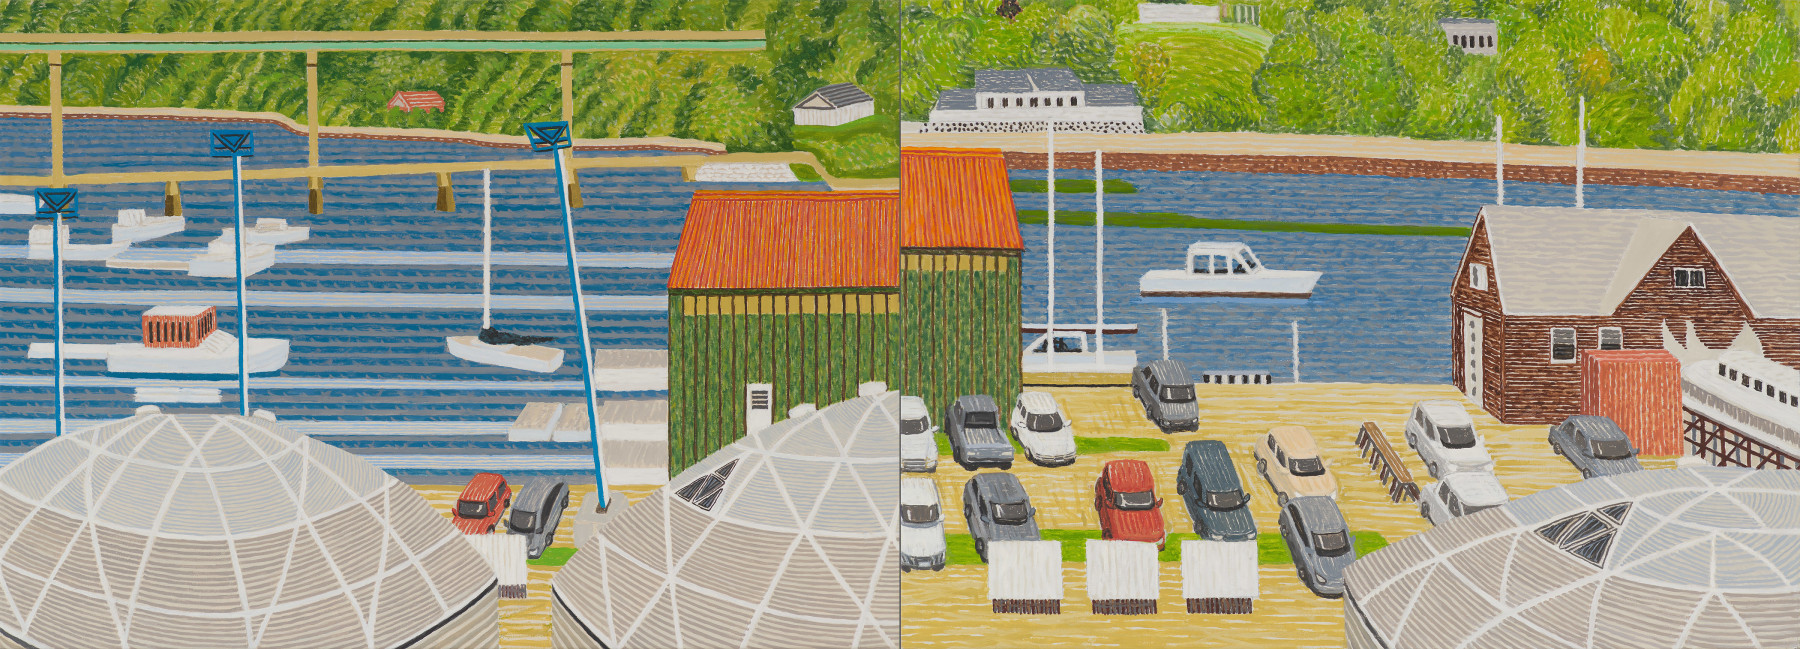 Belfast River Diptych, 2019. Oil on linen 26 x 72 inches